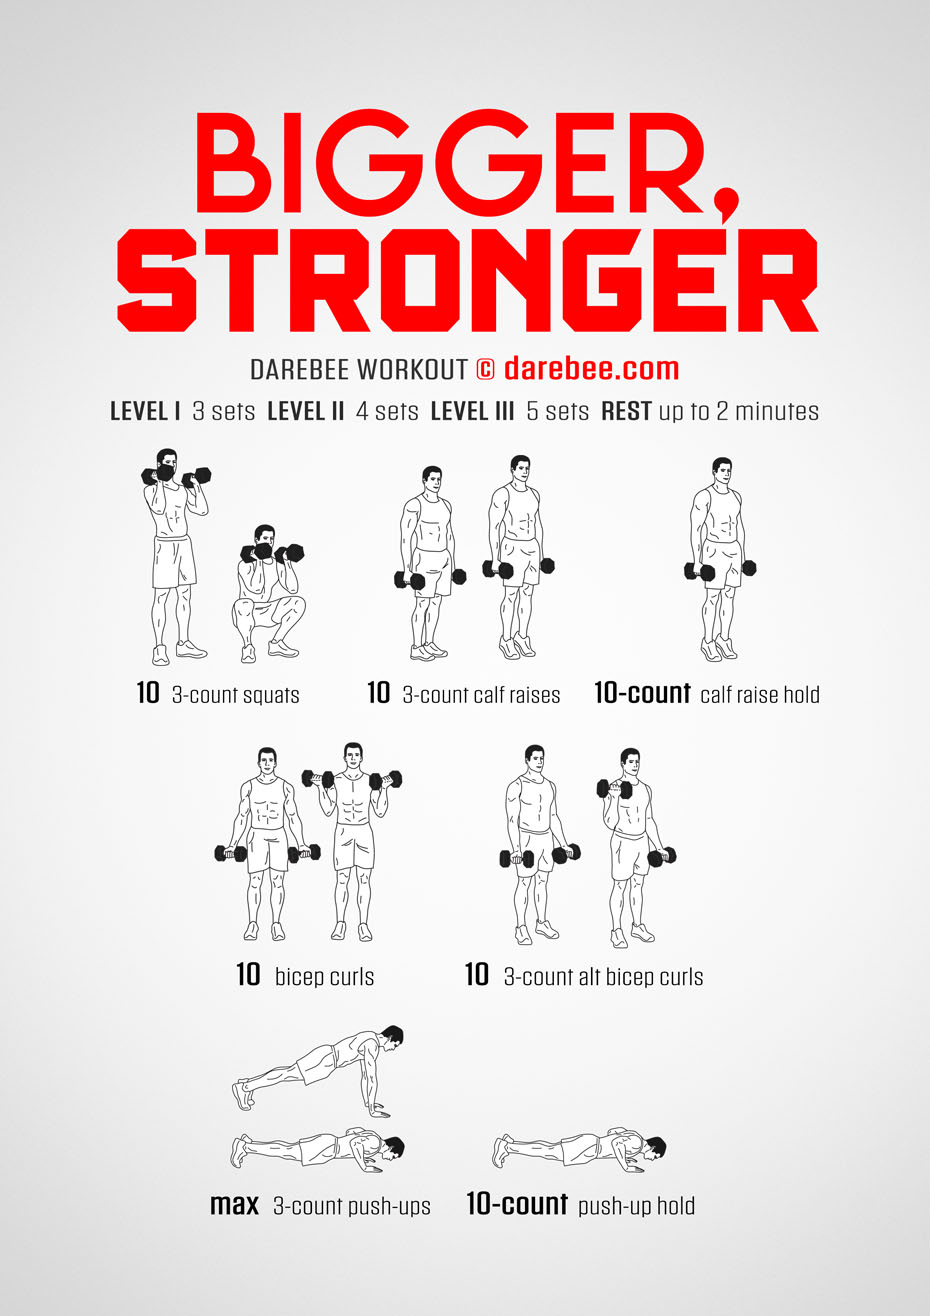 Bigger. Stronger is a Darebee home-fitness, dumbbell strength workout that helps your entire body get stronger and fitter. 